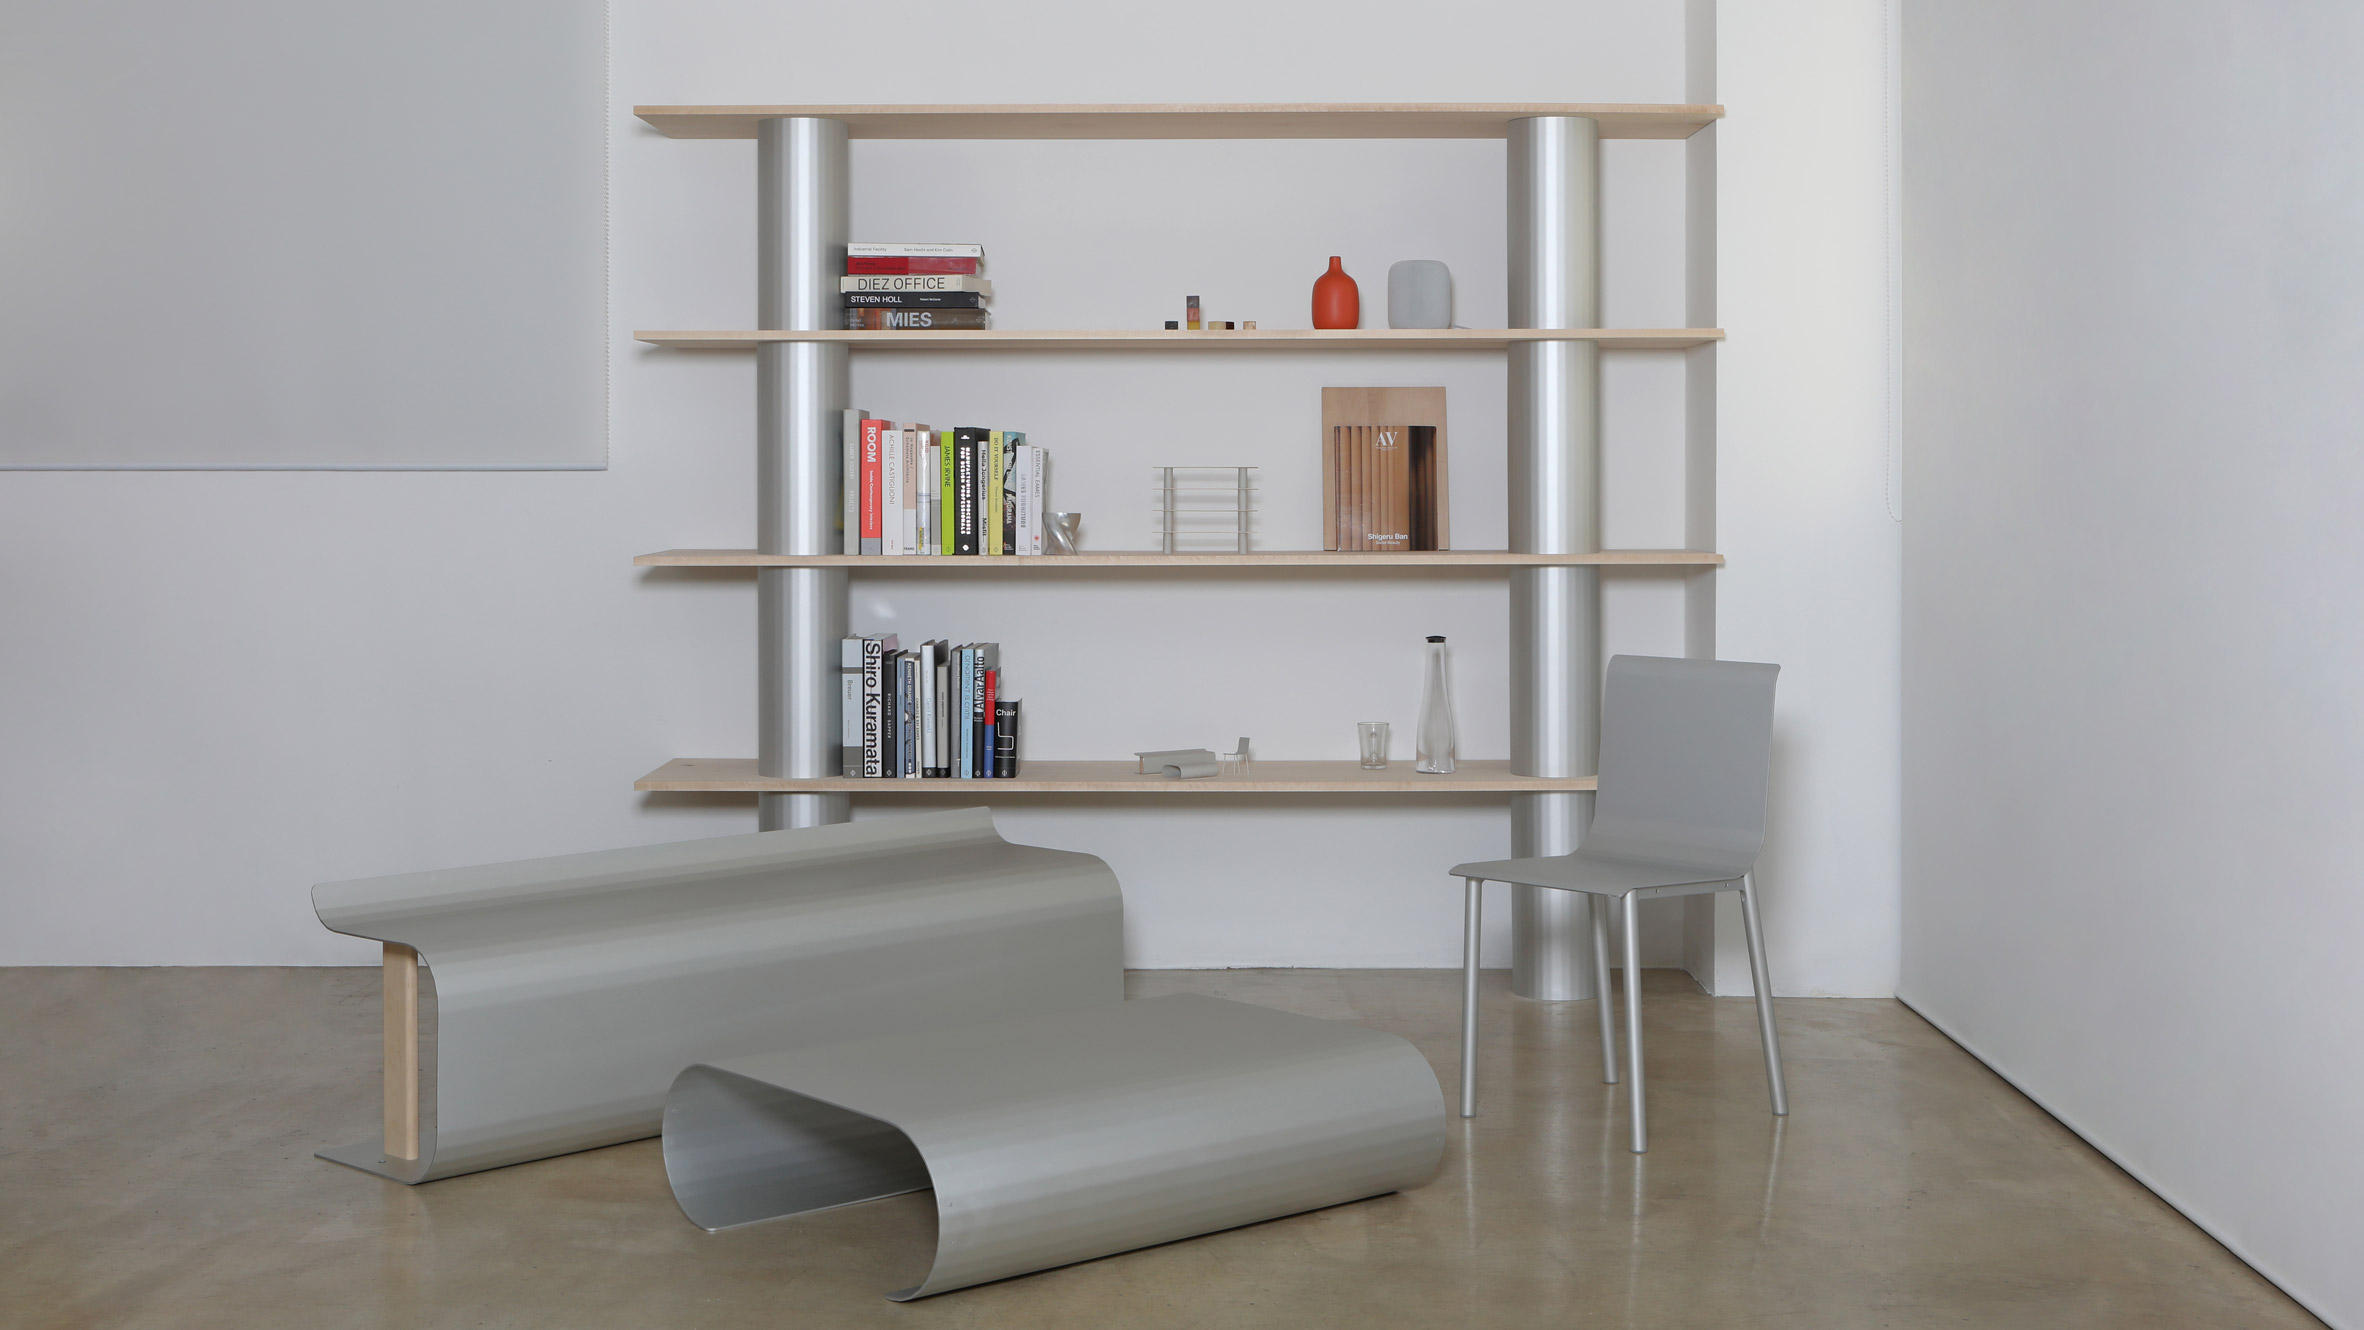 Useful Workshop's Curvature furniture is made from pressed sheet metal